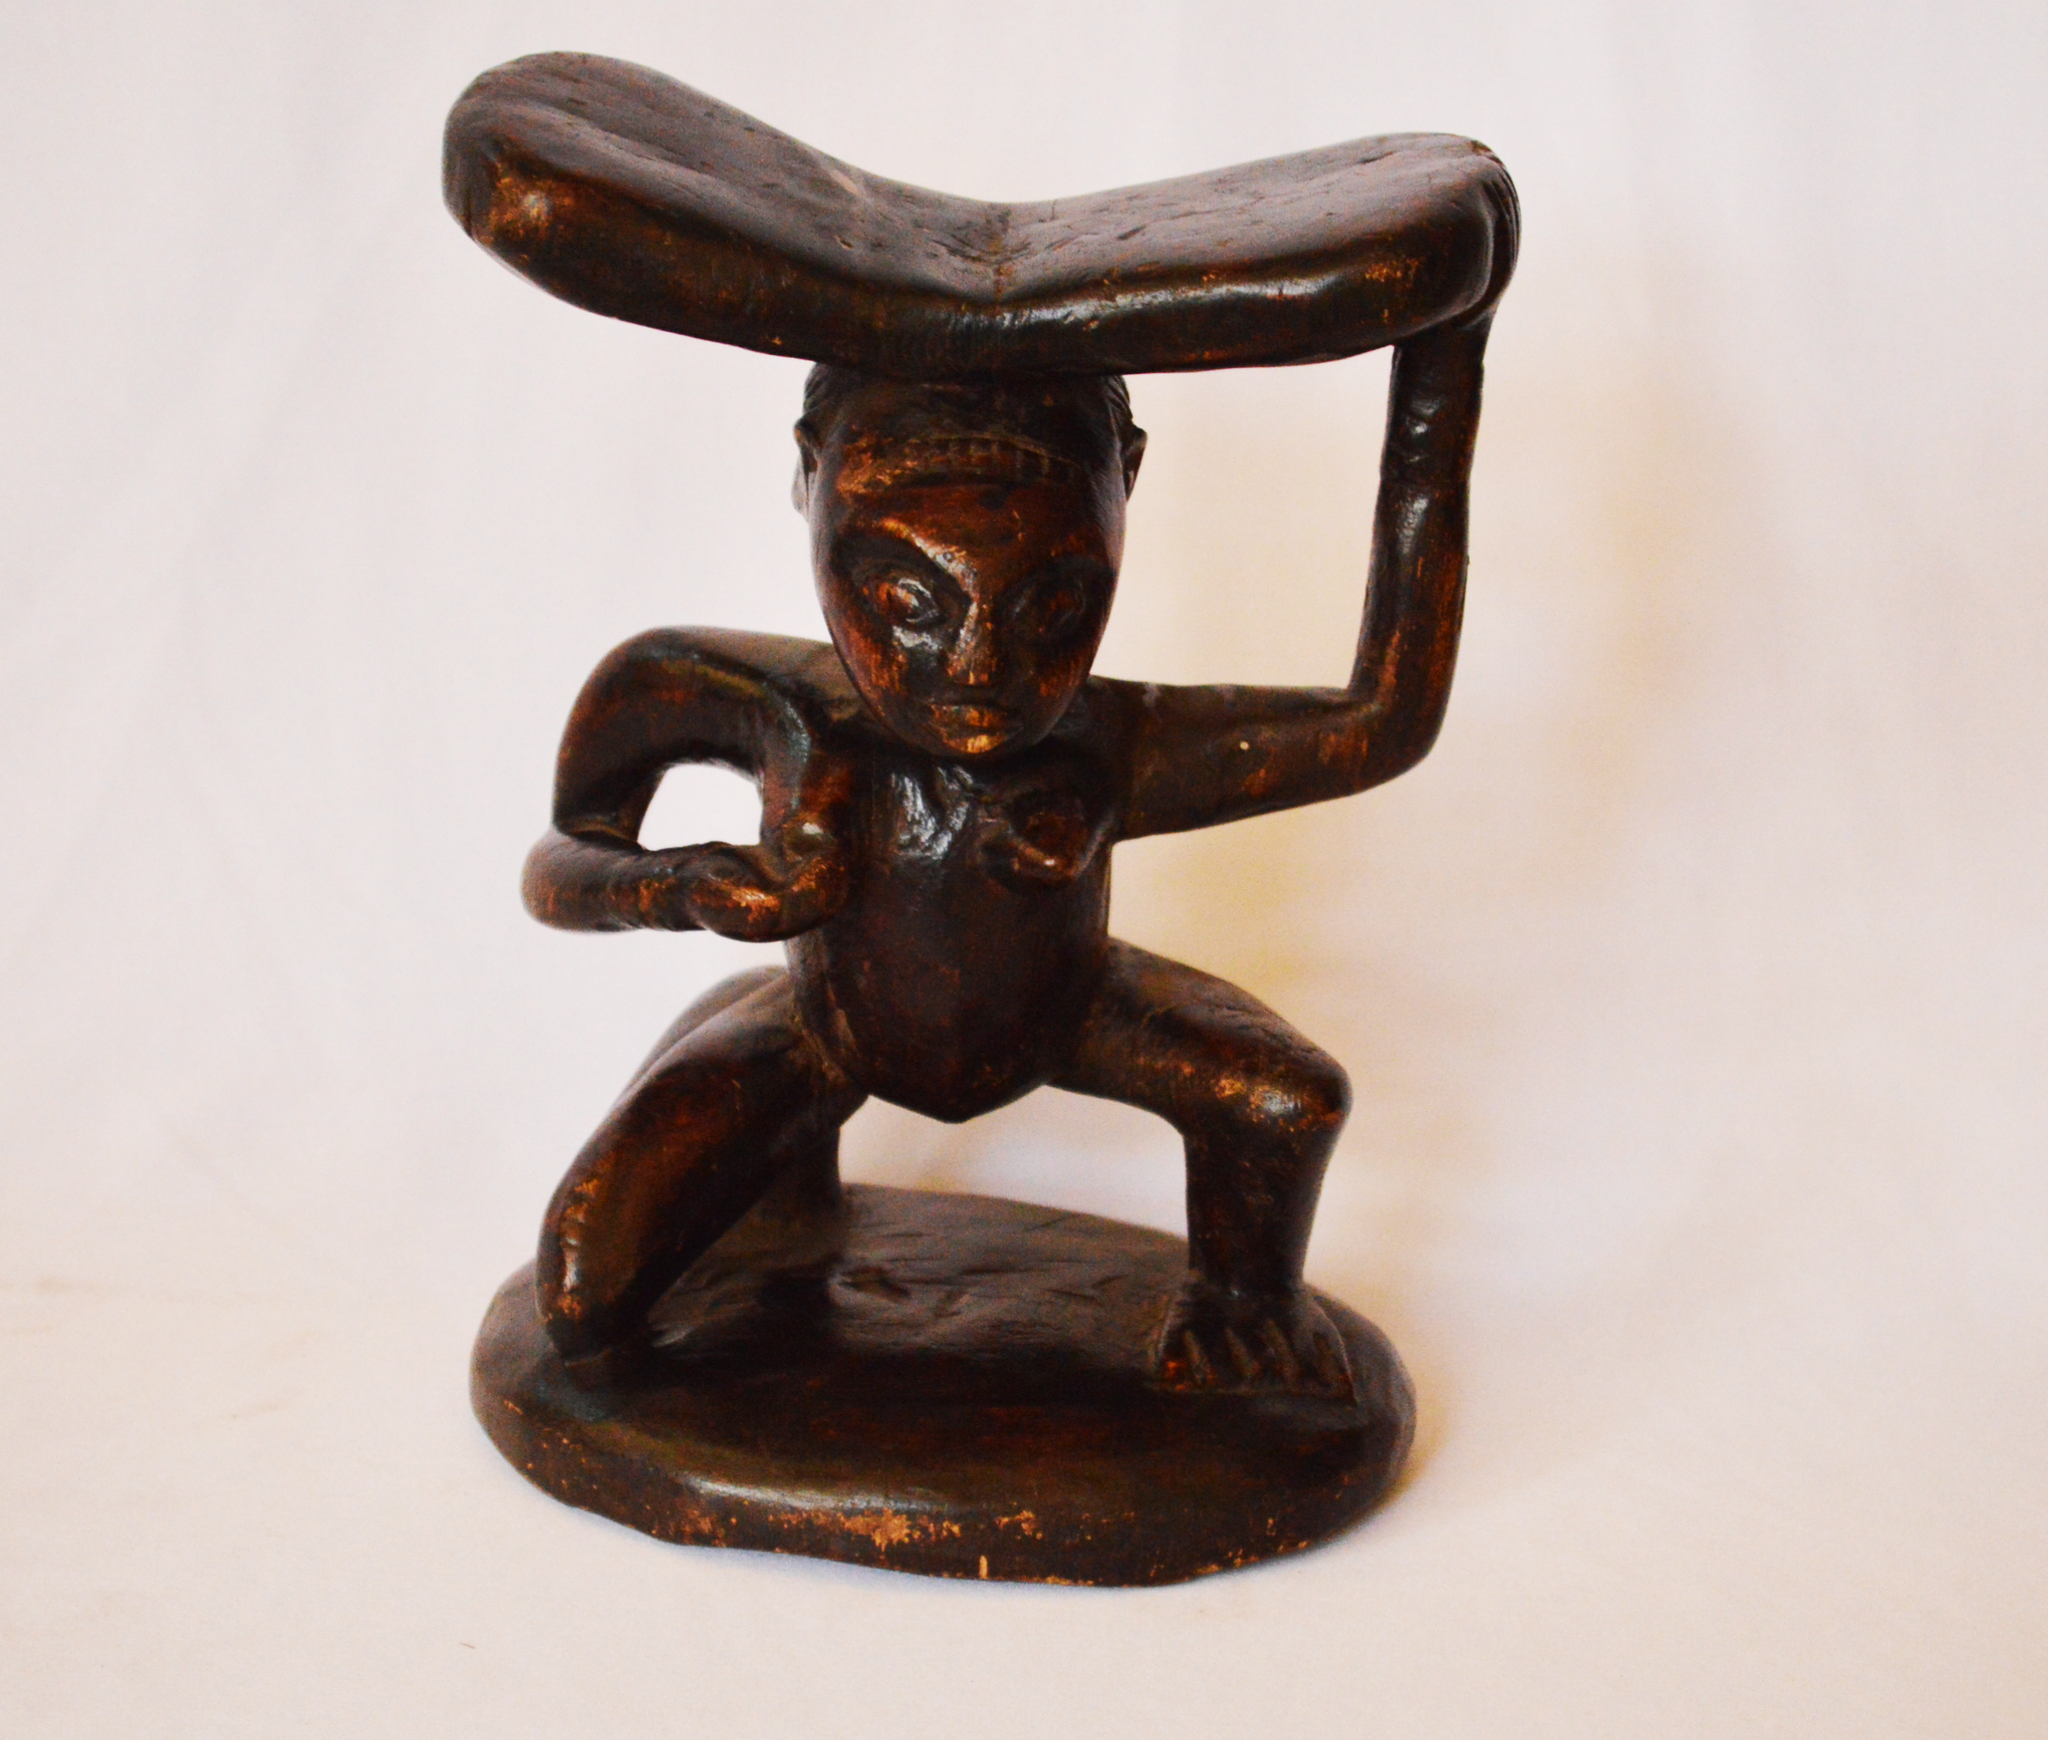 Lega Headrest - Authentic African handicrafts | Clothing, bags, painting, toys & more - CULTURE HUB by Muthoni Unchained